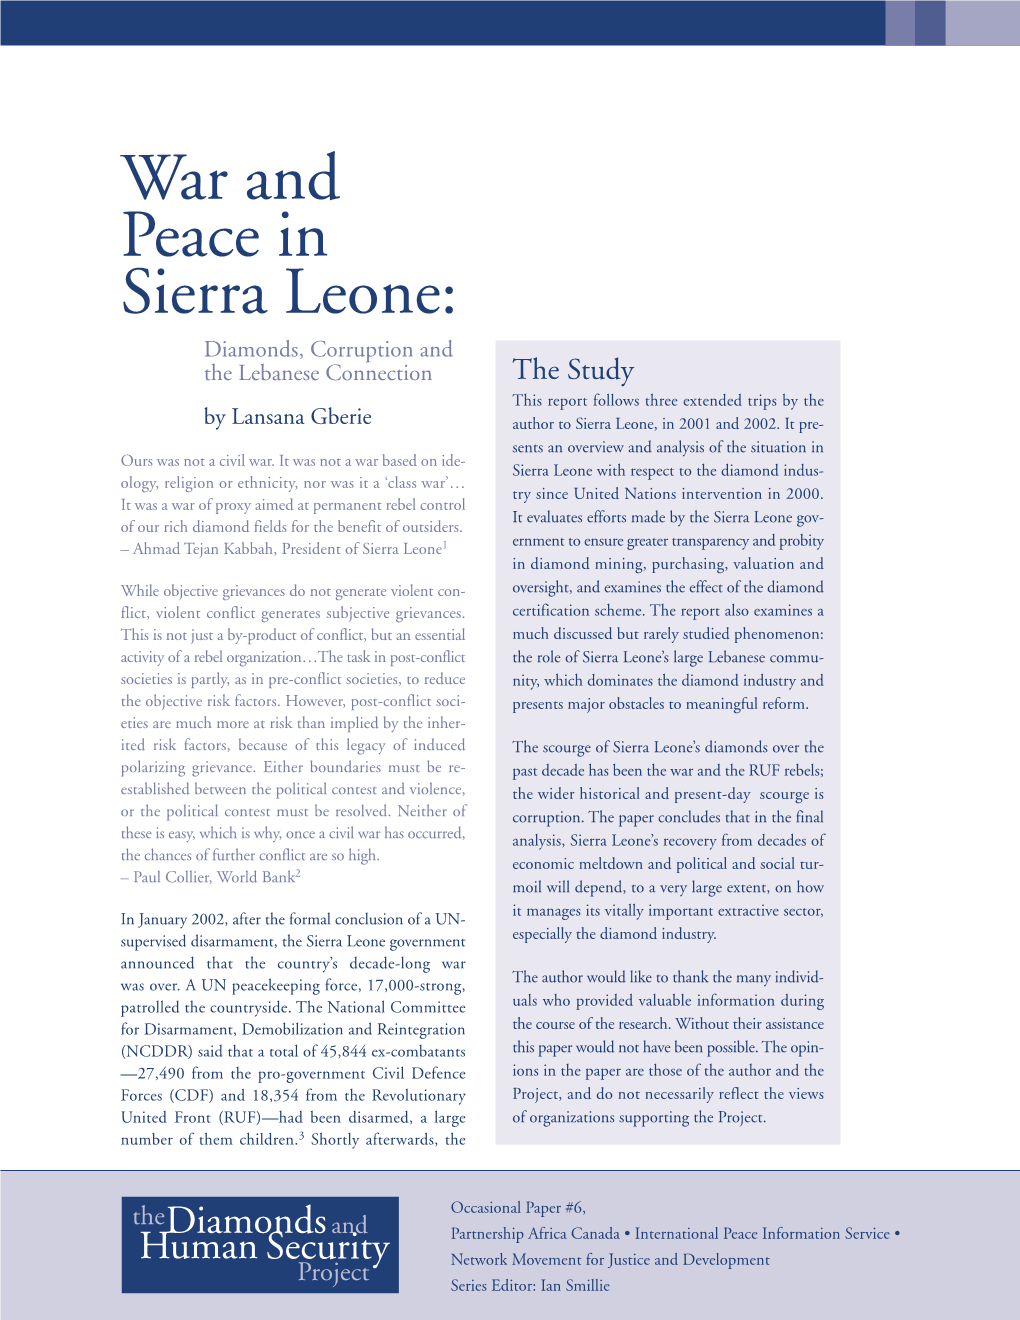 War and Peace in Sierra Leone: Diamonds, Corruption and The